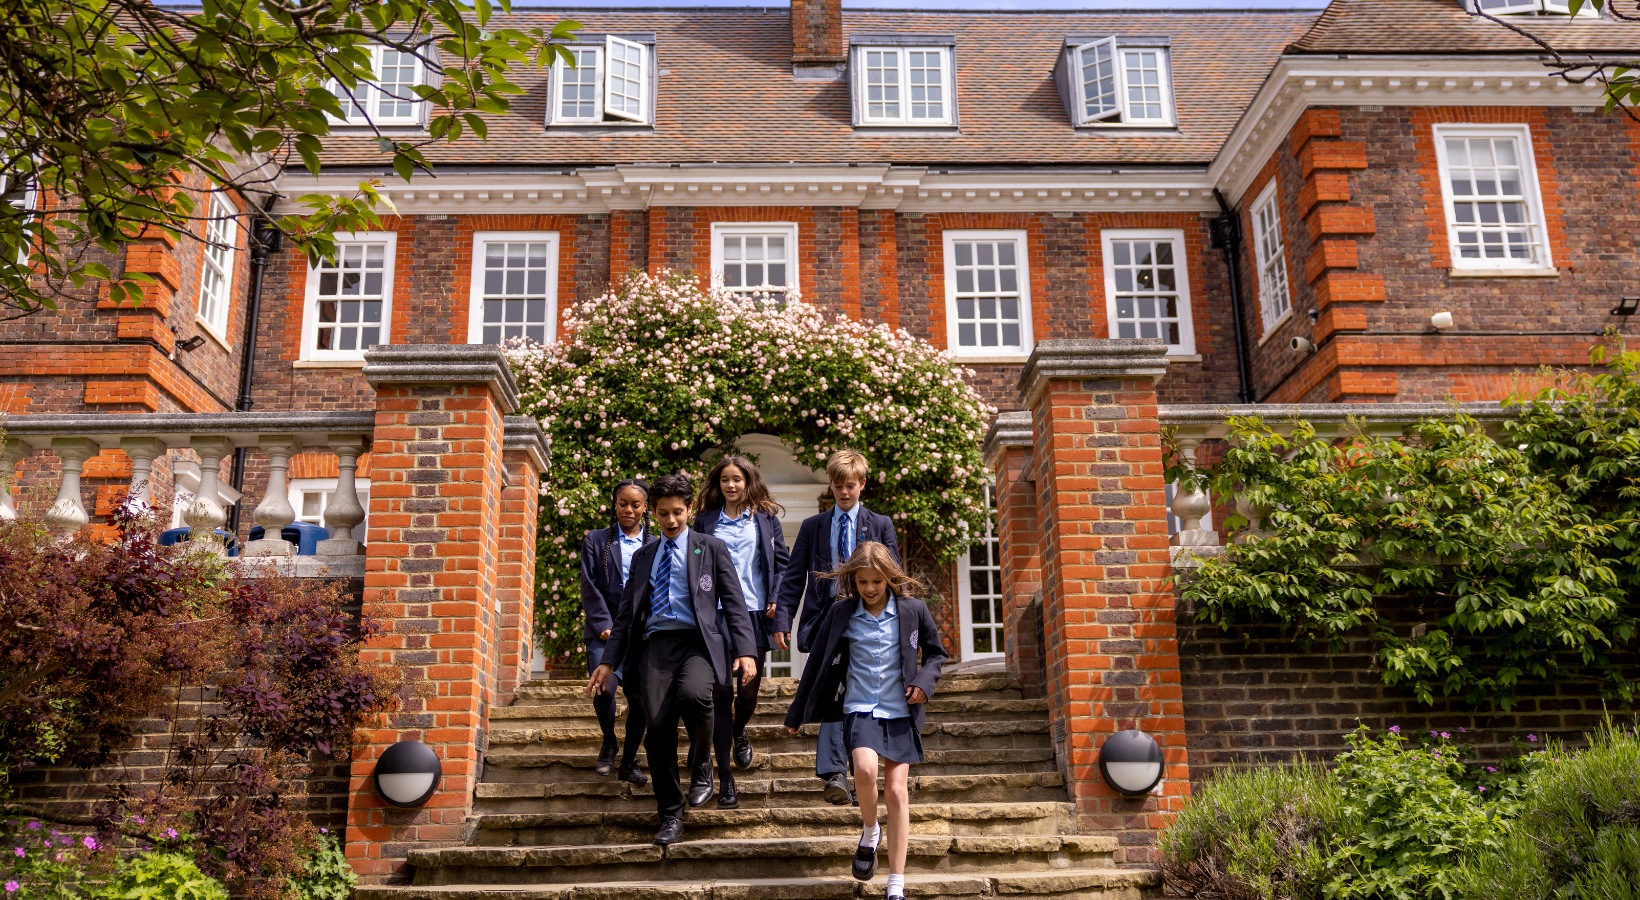 Pupils running down the main stairs of Ibstock Place School, Near Richmond, Barnes, Putney, Kingston, & Wandsworth 